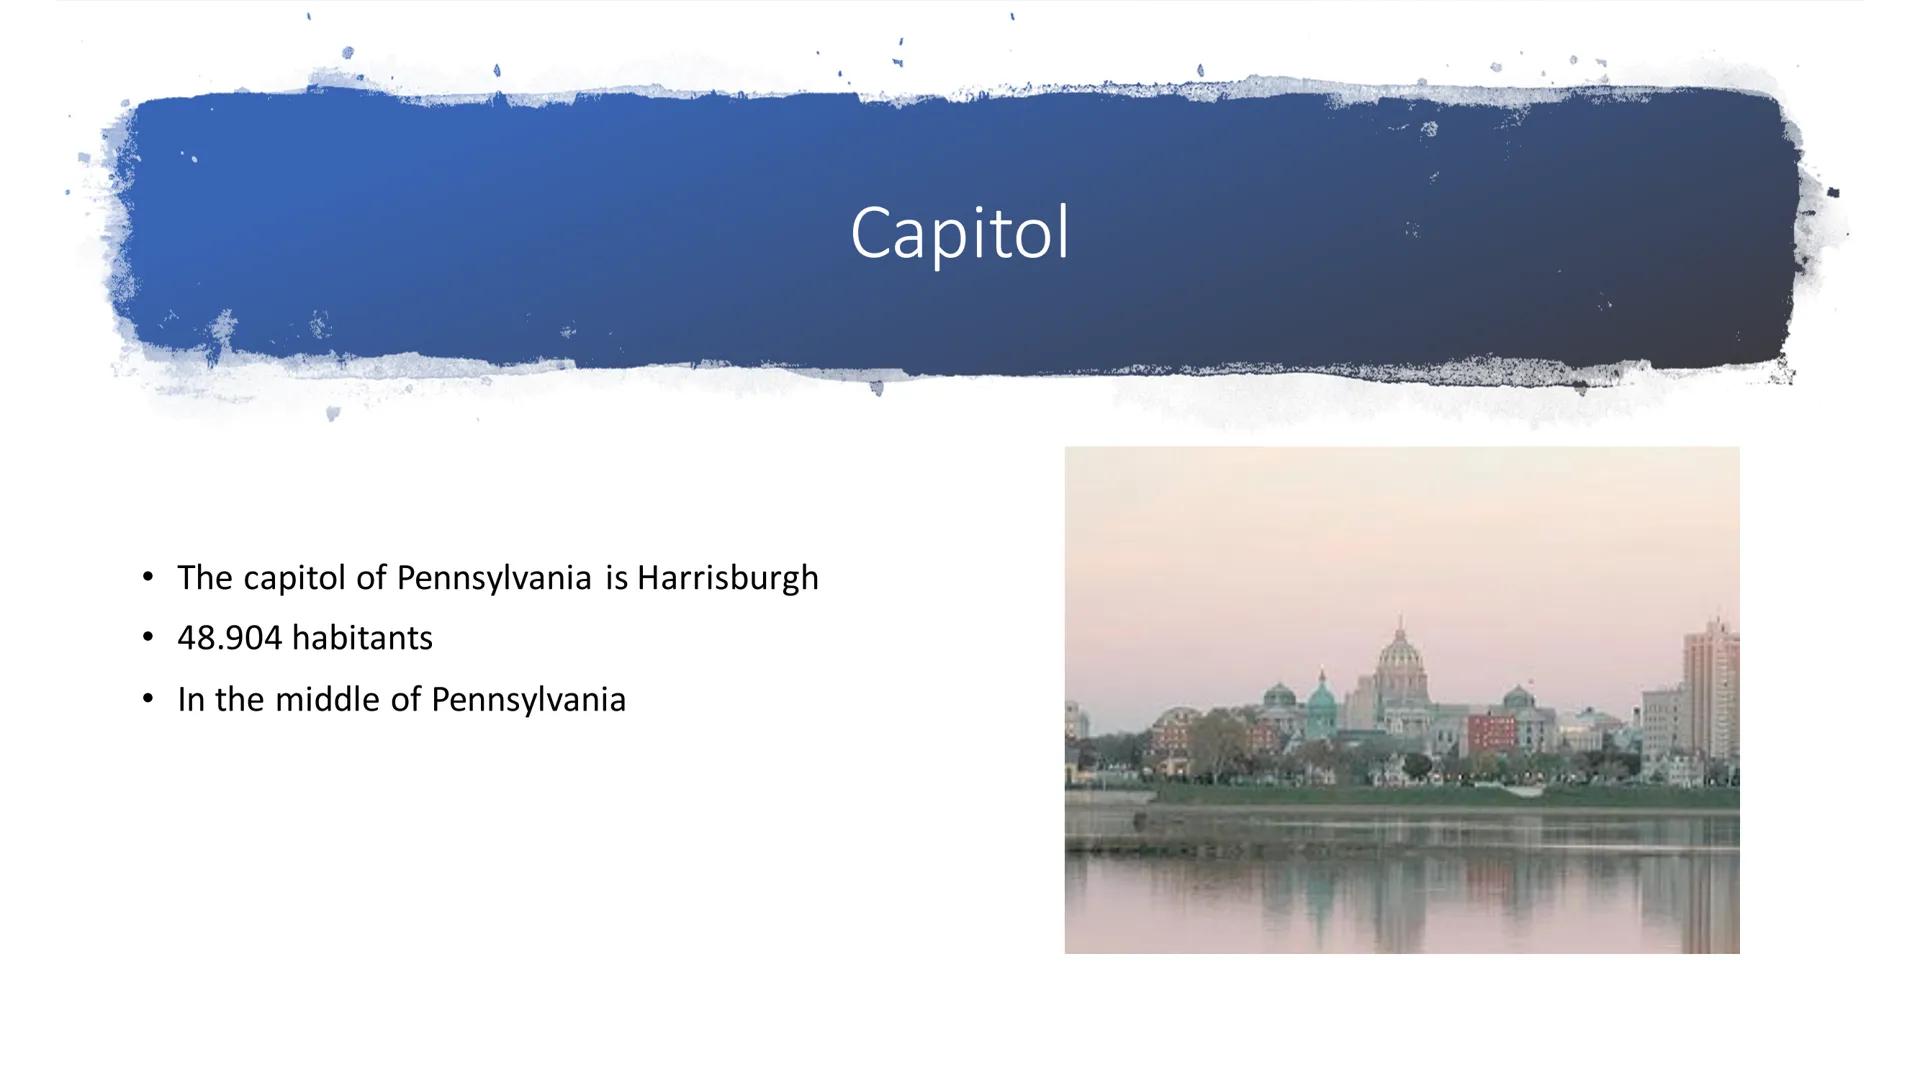 Pennsylvania
State of the United States of America ●
●
●
General information
Geography
Capitol
Highlights
Sources
Content General informatio